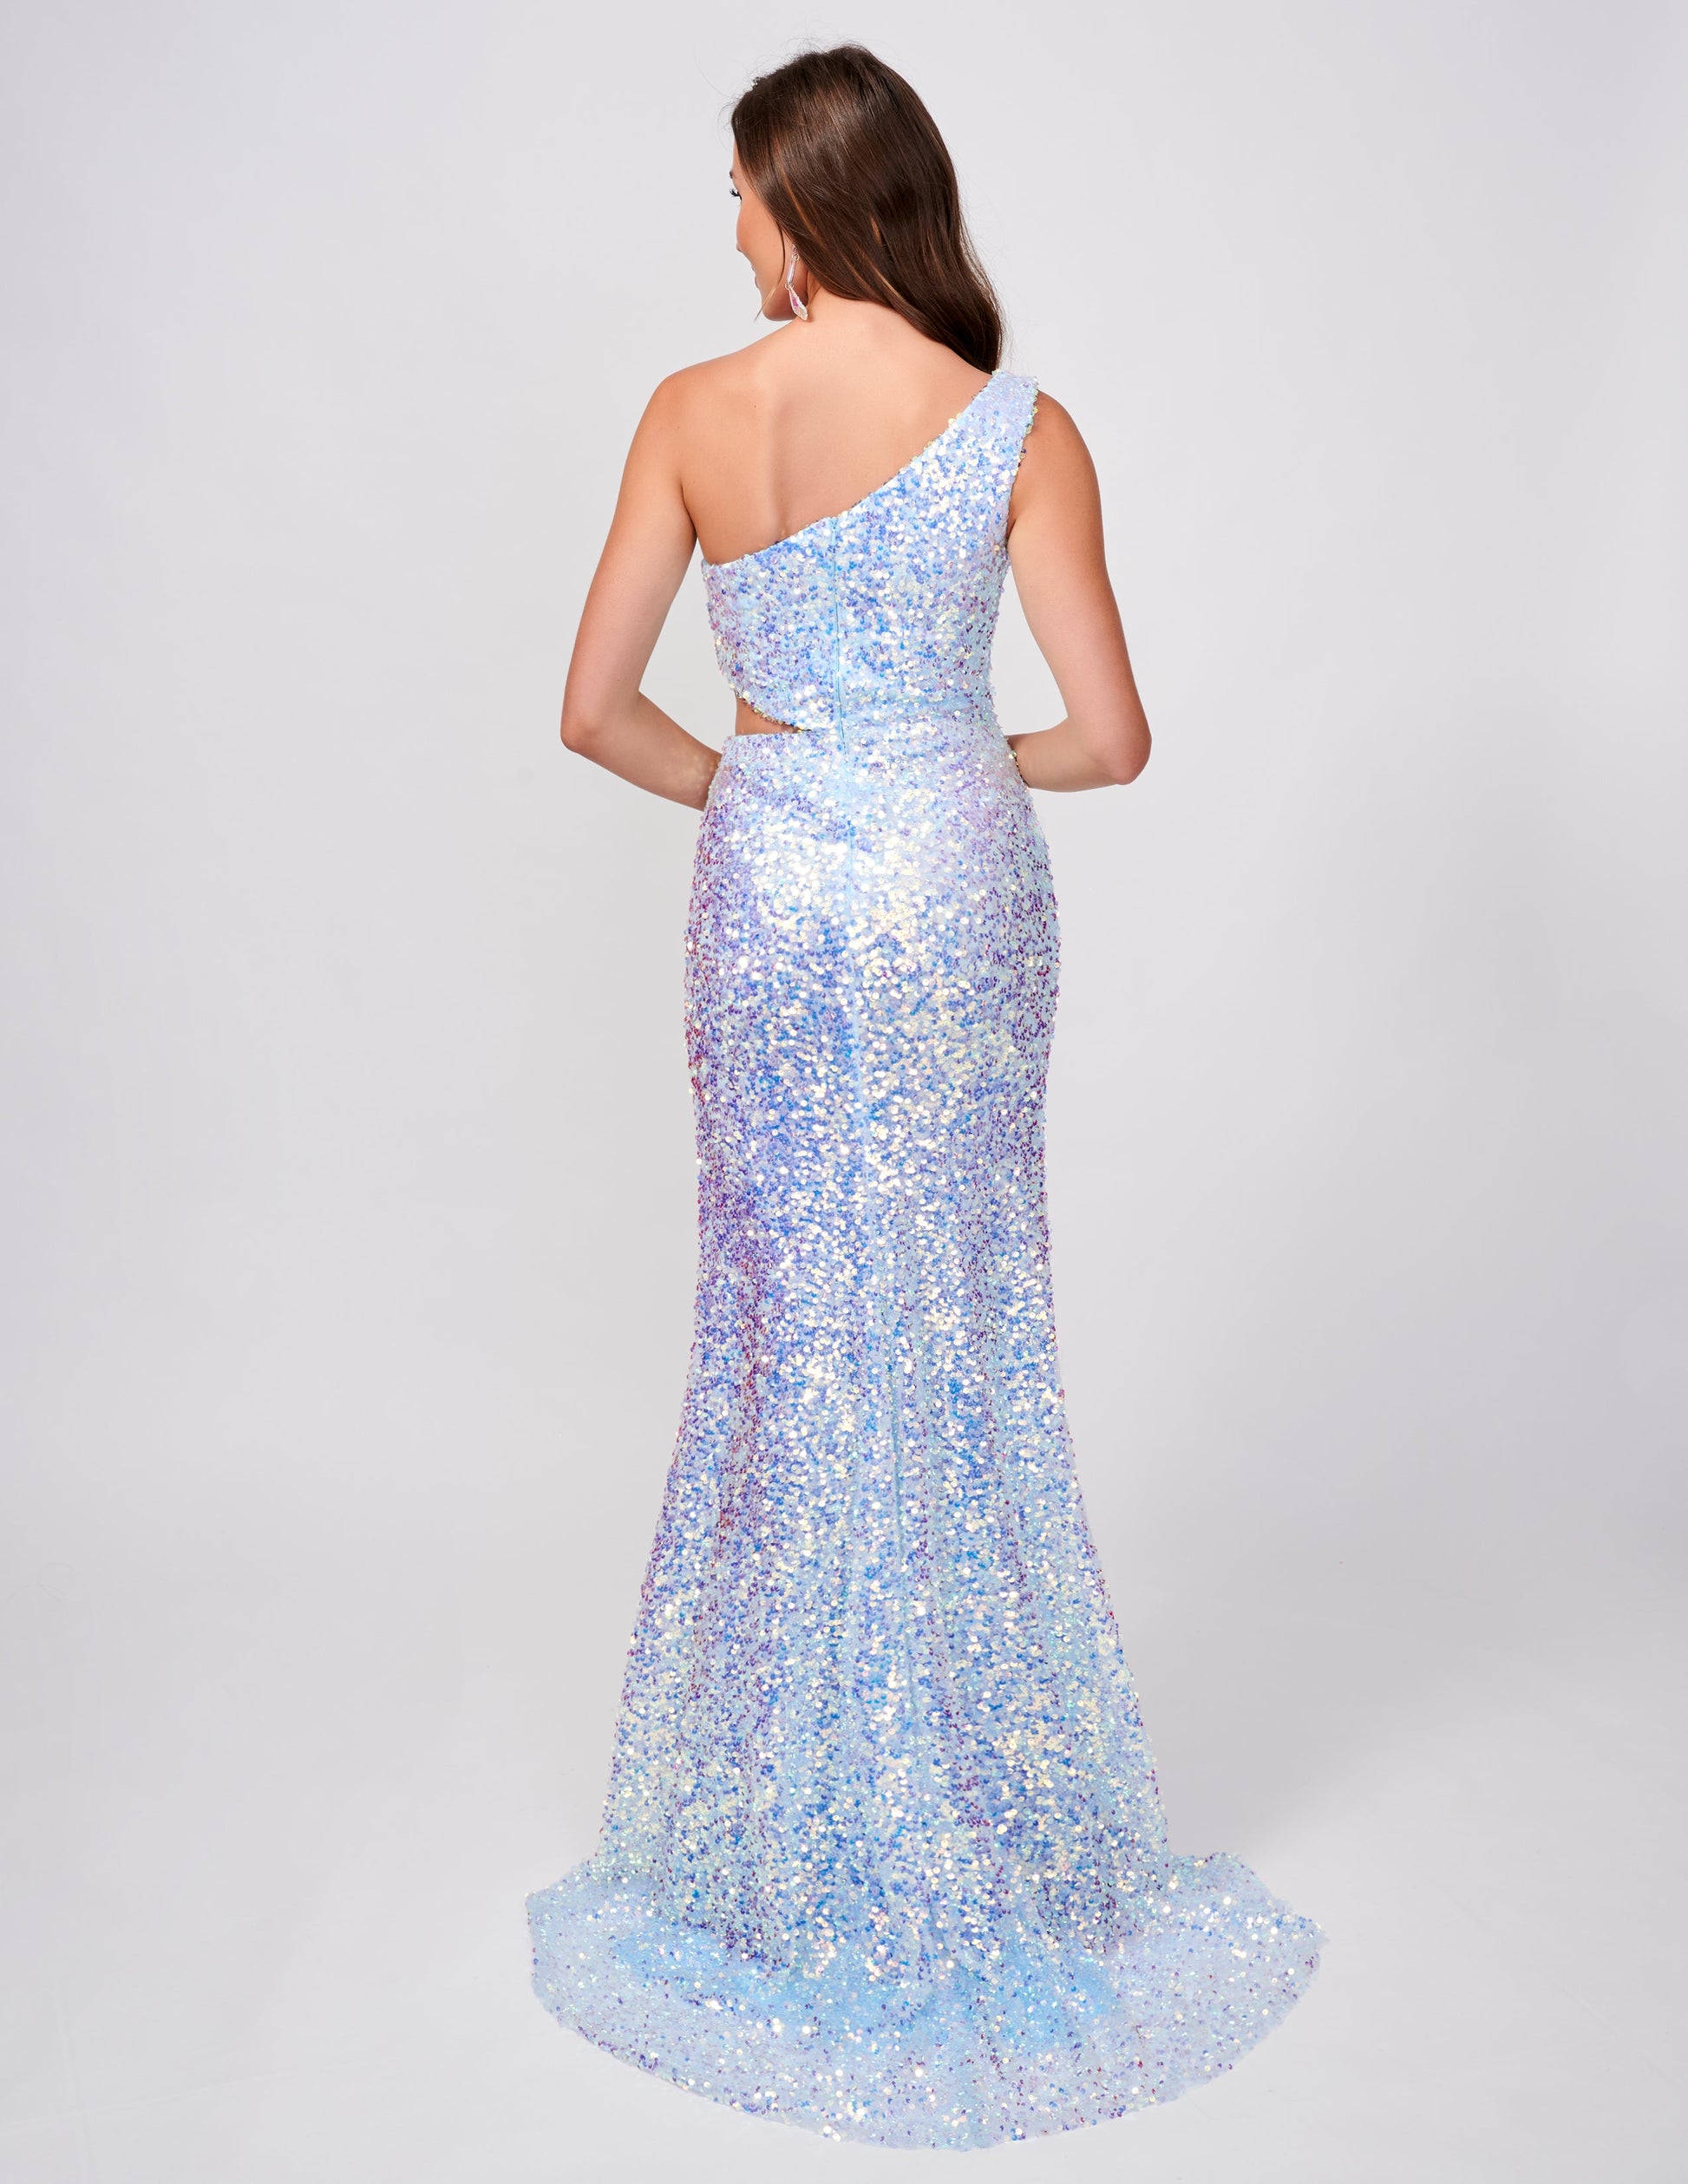 <p data-mce-fragment="1">Be the center of attention in this stunning Nina Canacci 4413 sequin one shoulder prom dress. Featuring a cut out slit design, this formal gown offers a fitted silhouette for a flattering look. Perfect for any evening event, be prepared to make a statement with this elegant and modern dress.</p> <p data-mce-fragment="1">Sizes: 0-12</p> <p data-mce-fragment="1">Colors: Fuchsia, Baby Blue</p>